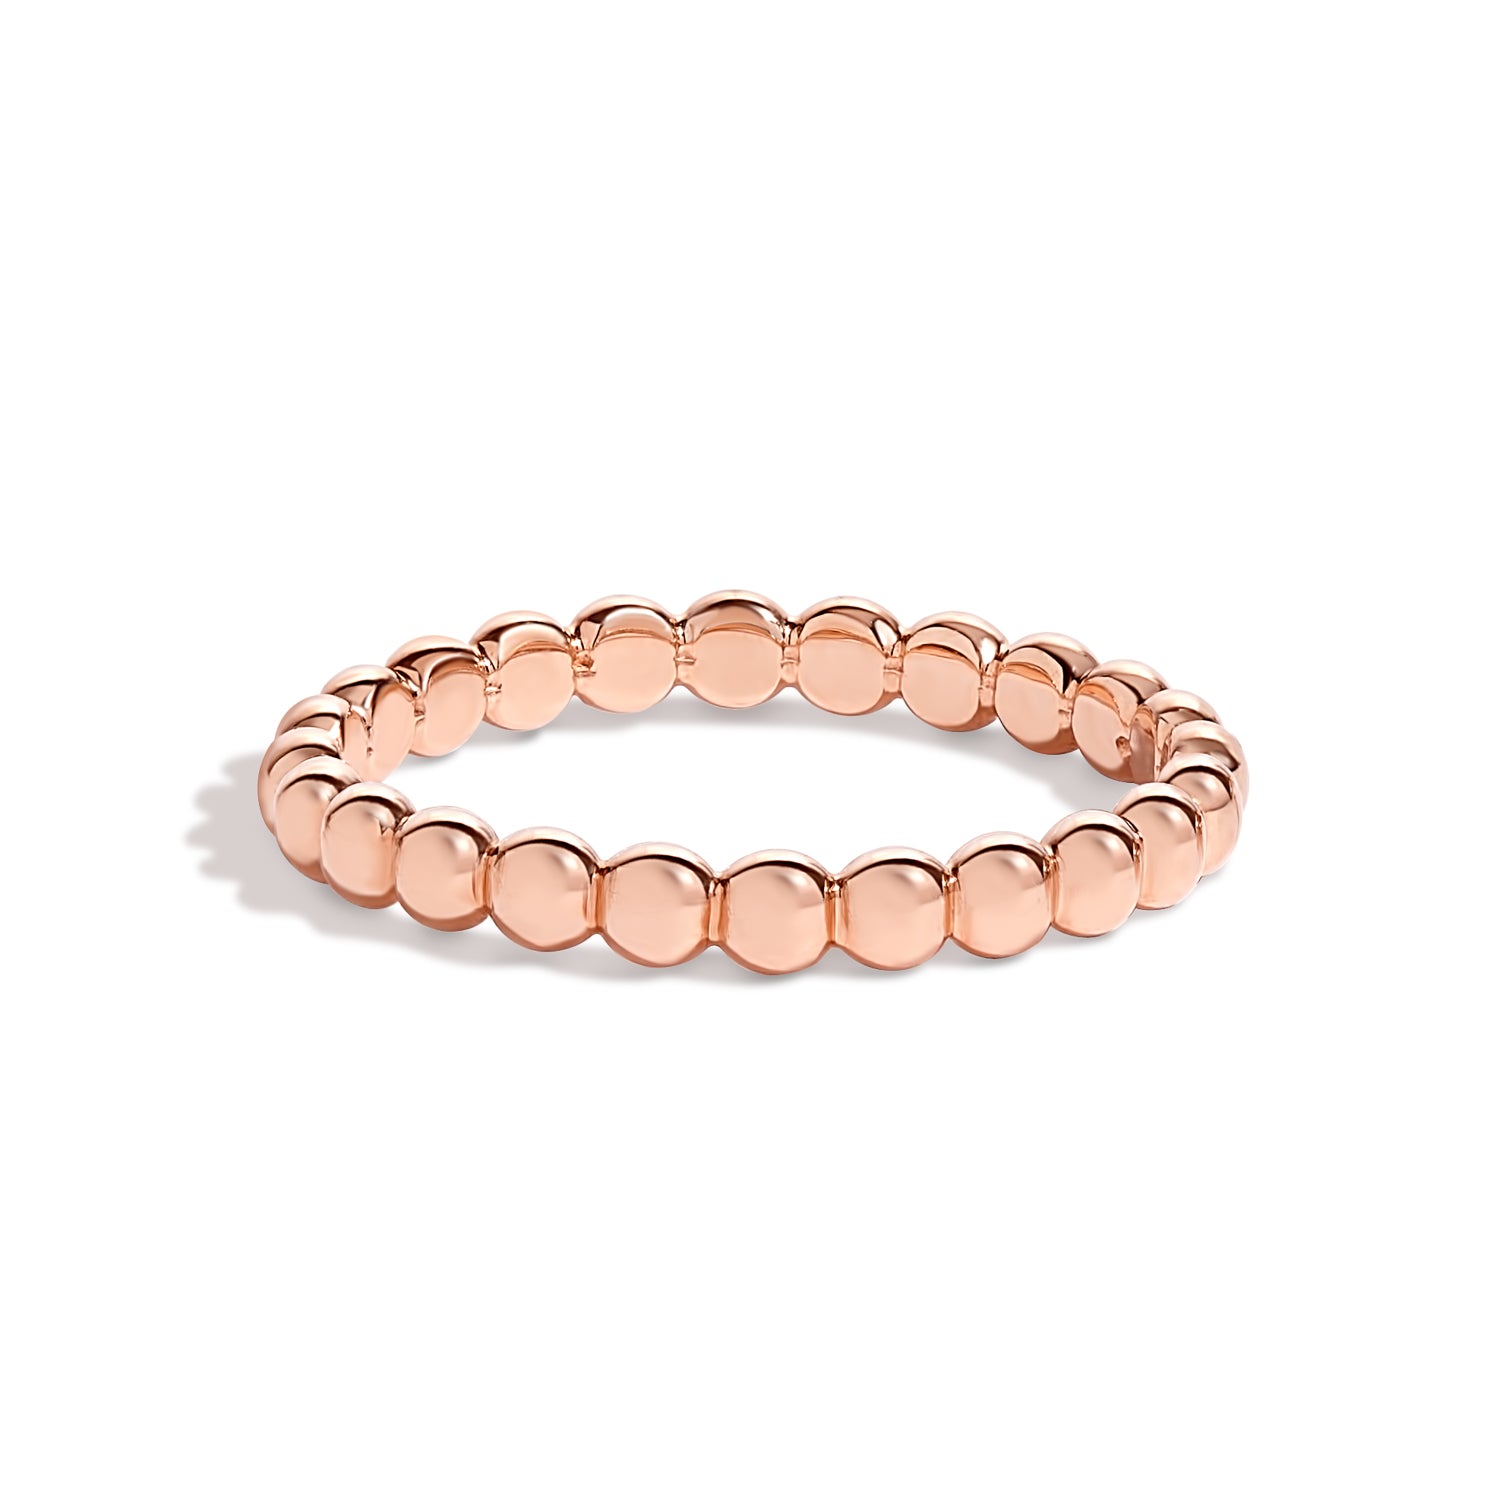 Shahla Karimi Jewelry Beaded Band in 14K Rose Gold